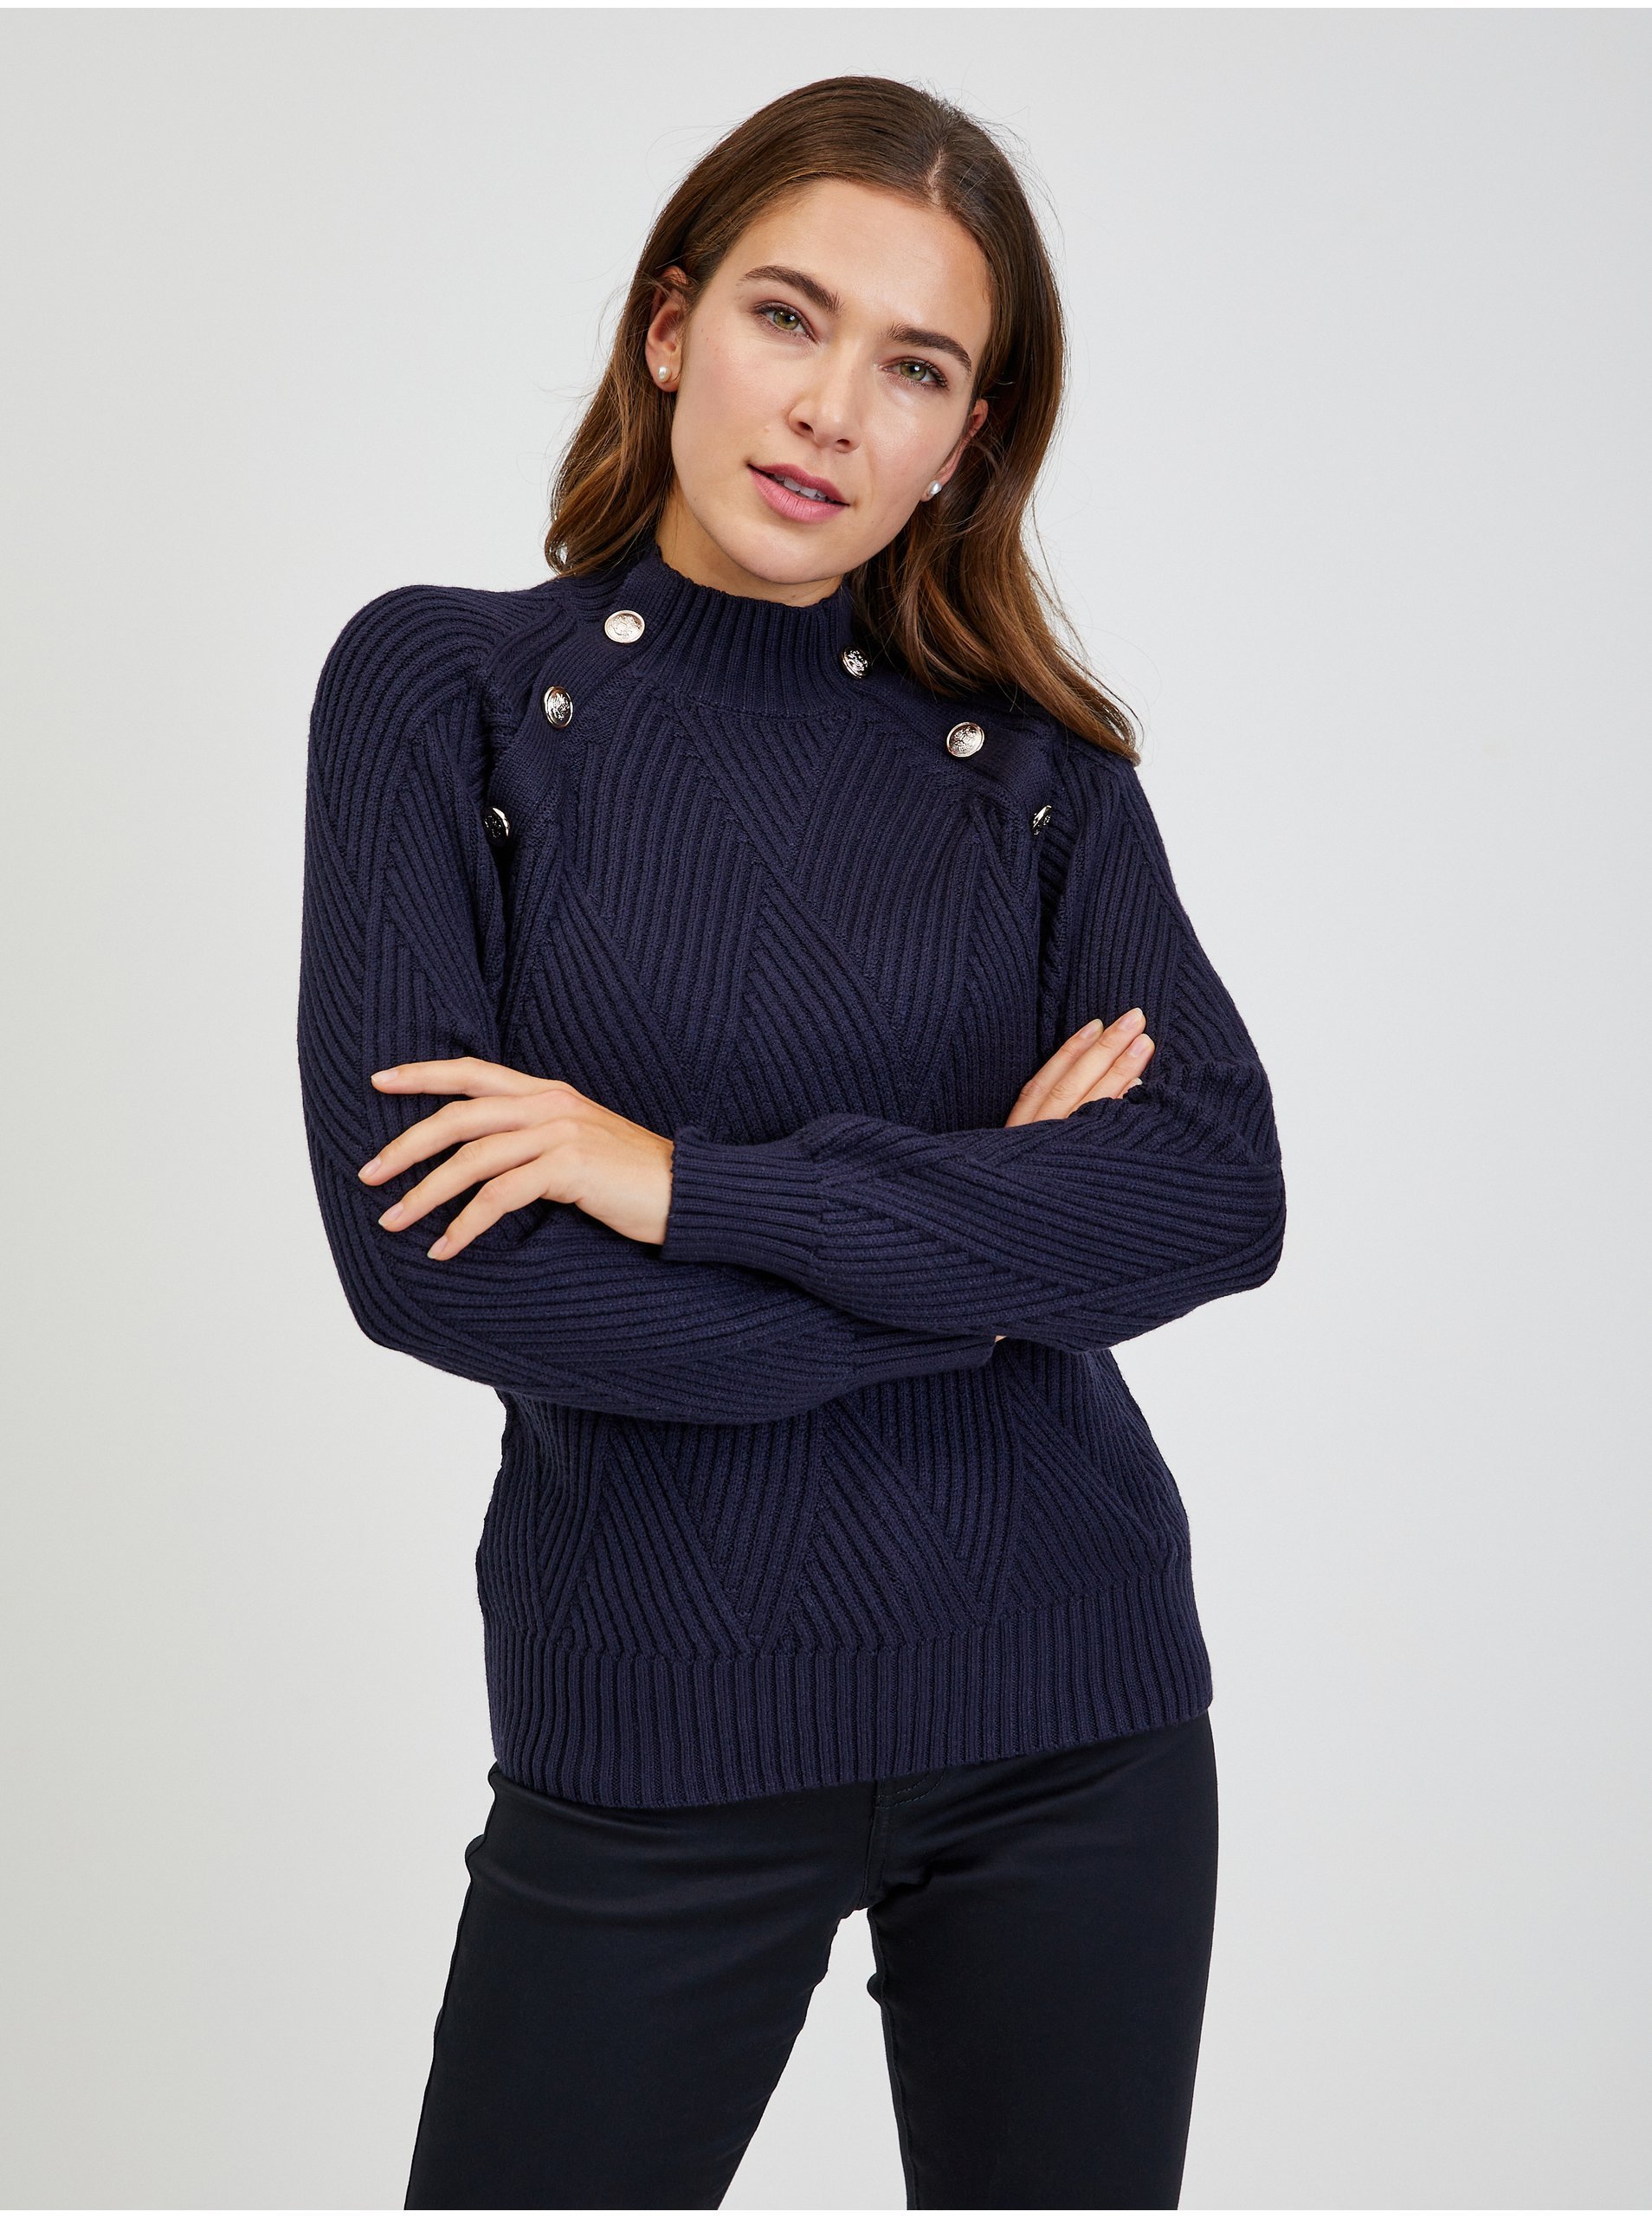 Dark Blue Women's Ribbed Sweater With Decorative Buttons ORSAY - Ladies